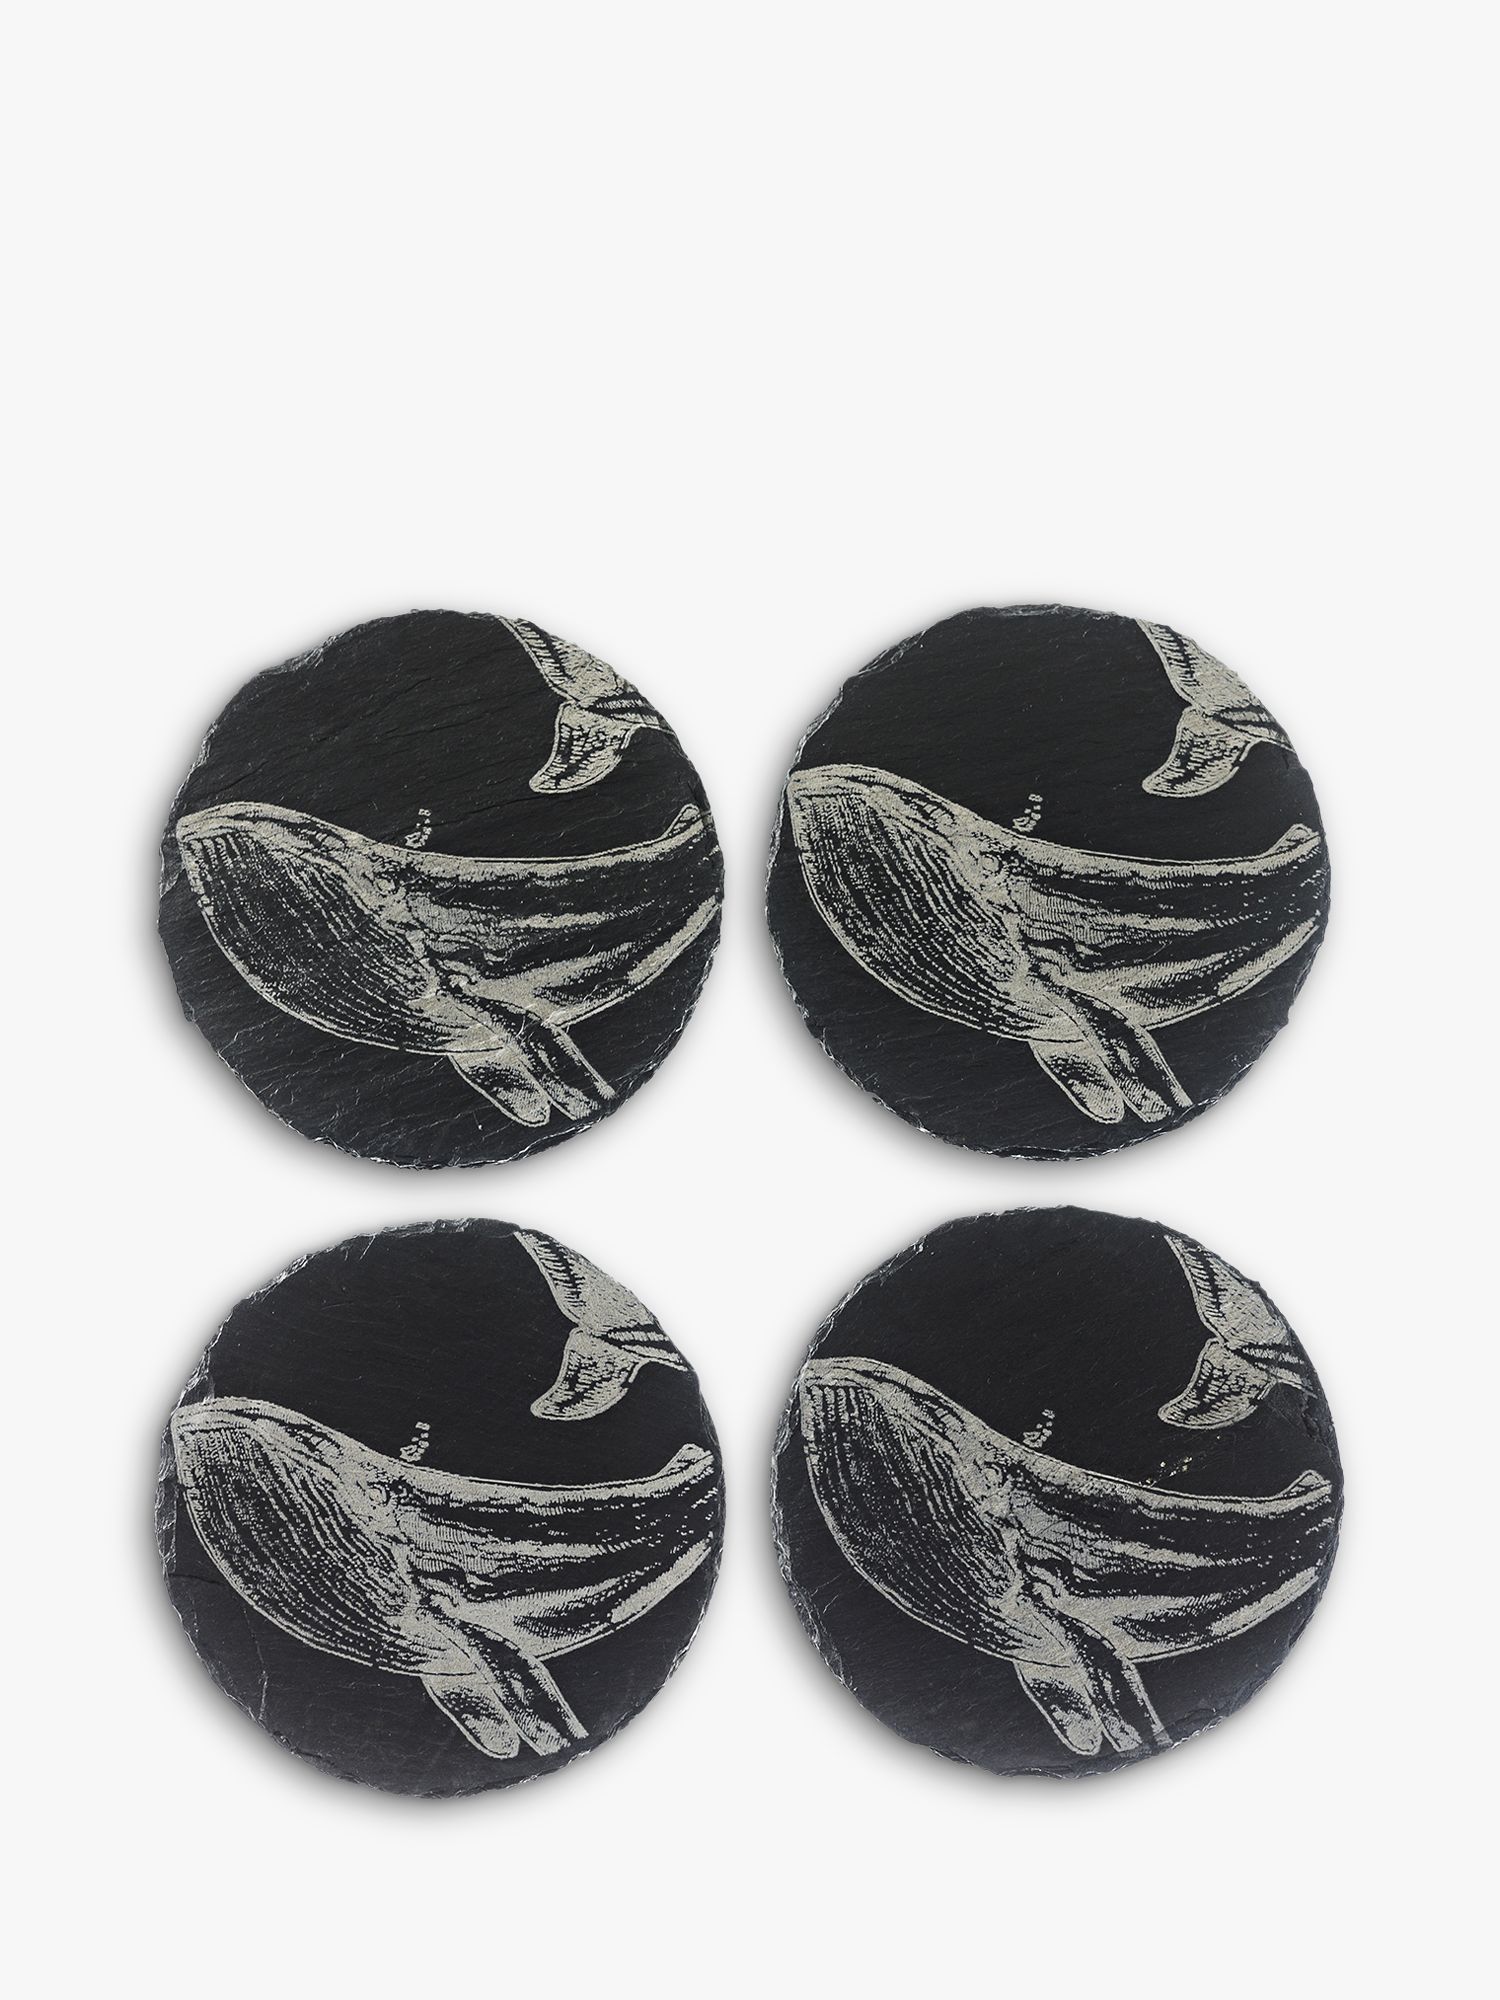 Whale Round Placemats And Coasters Set, Round Black Placemats And Coasters